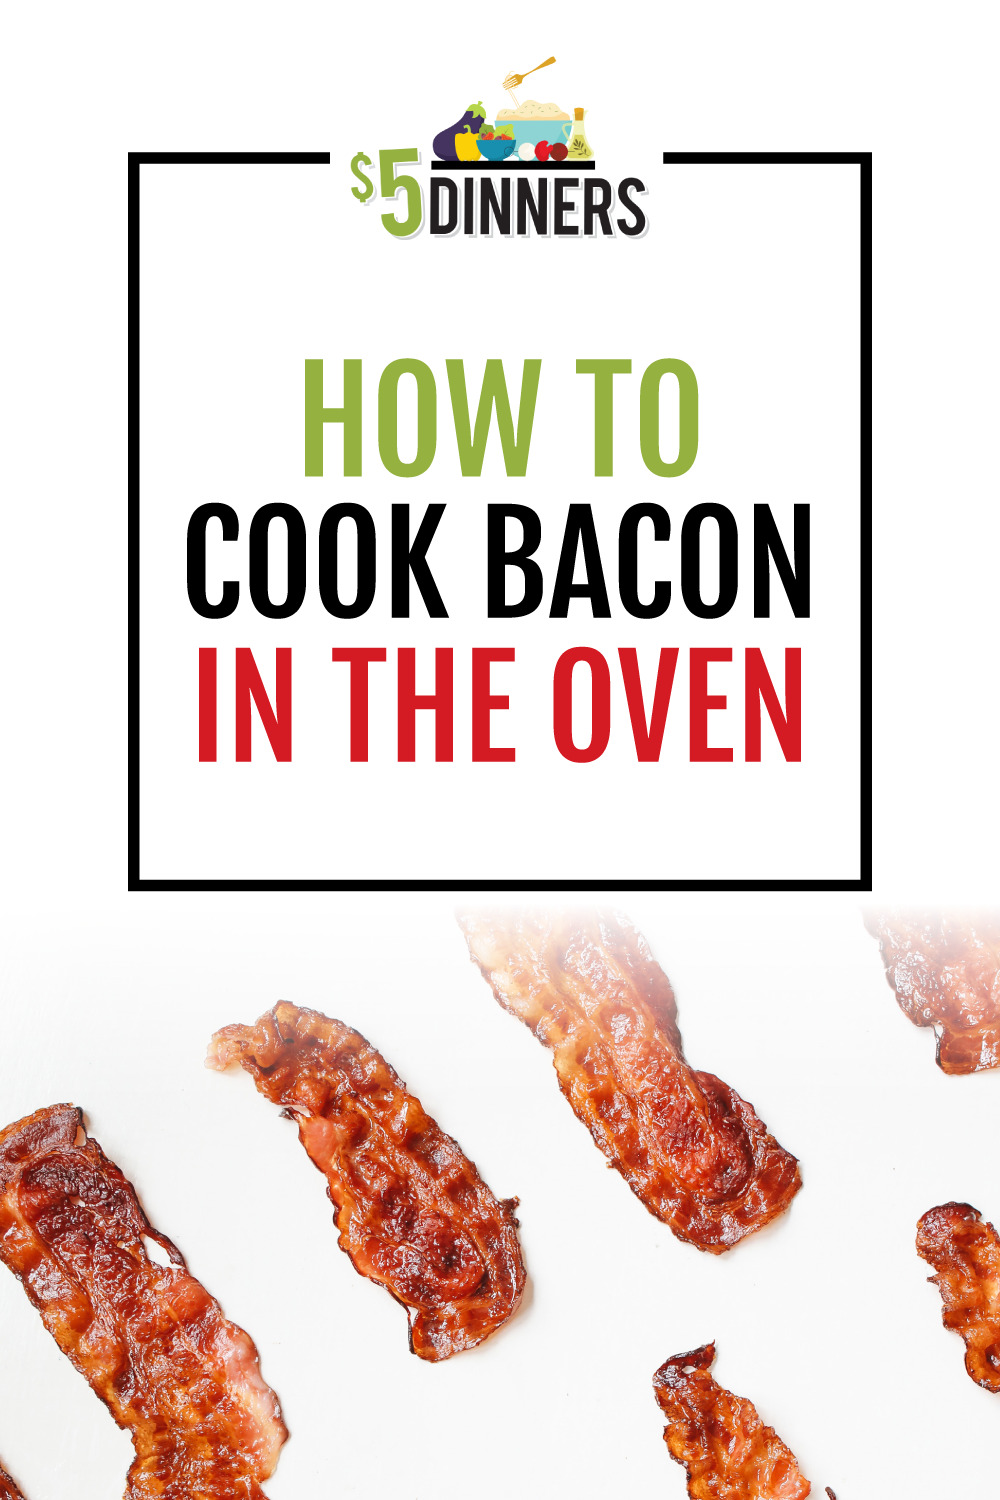 Best Oven Baked Bacon Recipe How to Cook Bacon in Oven